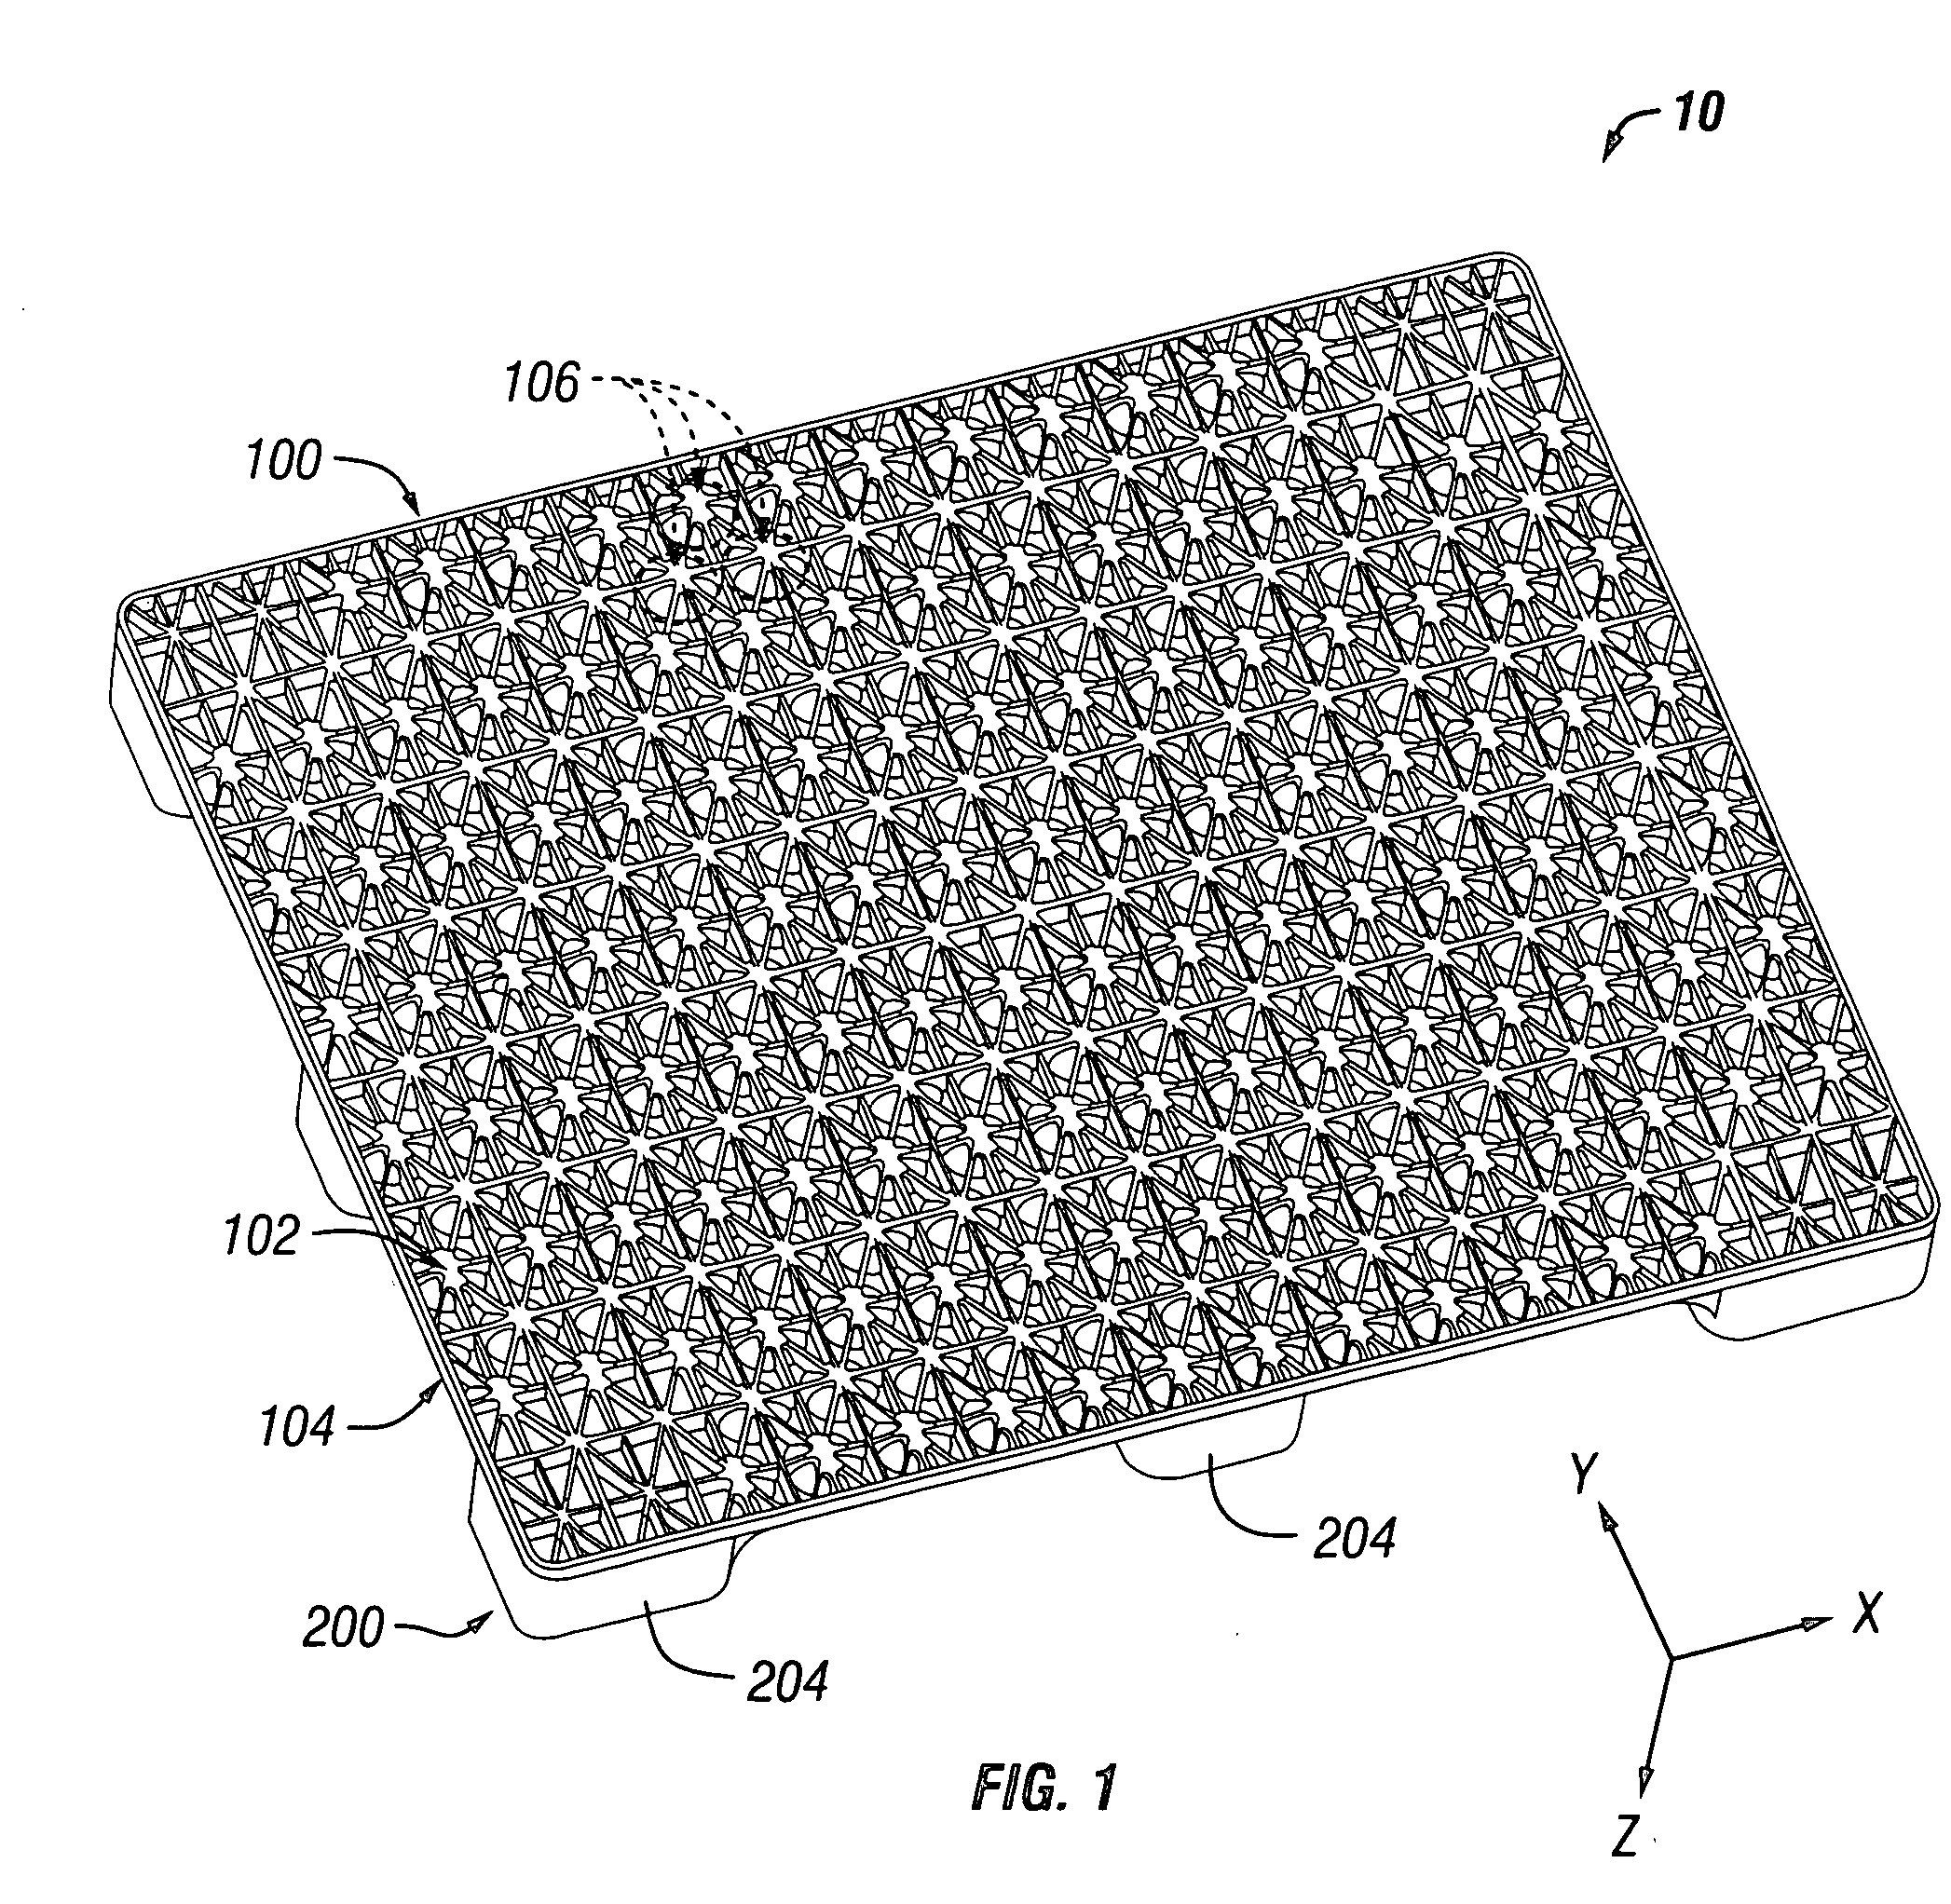 Rackable composite shipping pallet for transporting and storing loads